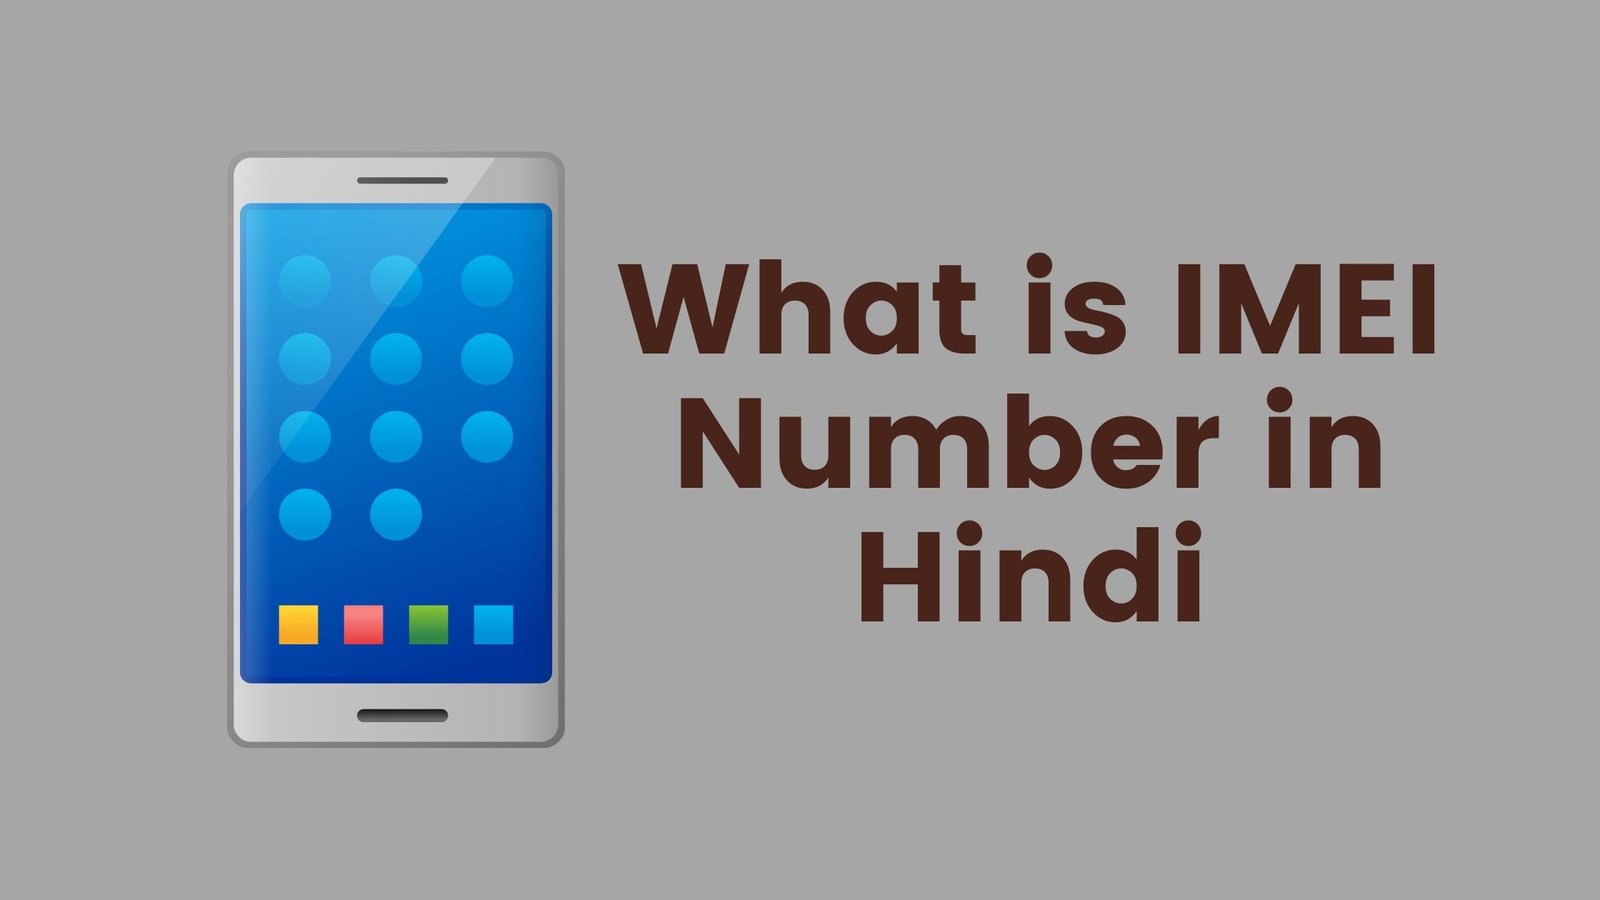 What is IMEI Number in Hindi